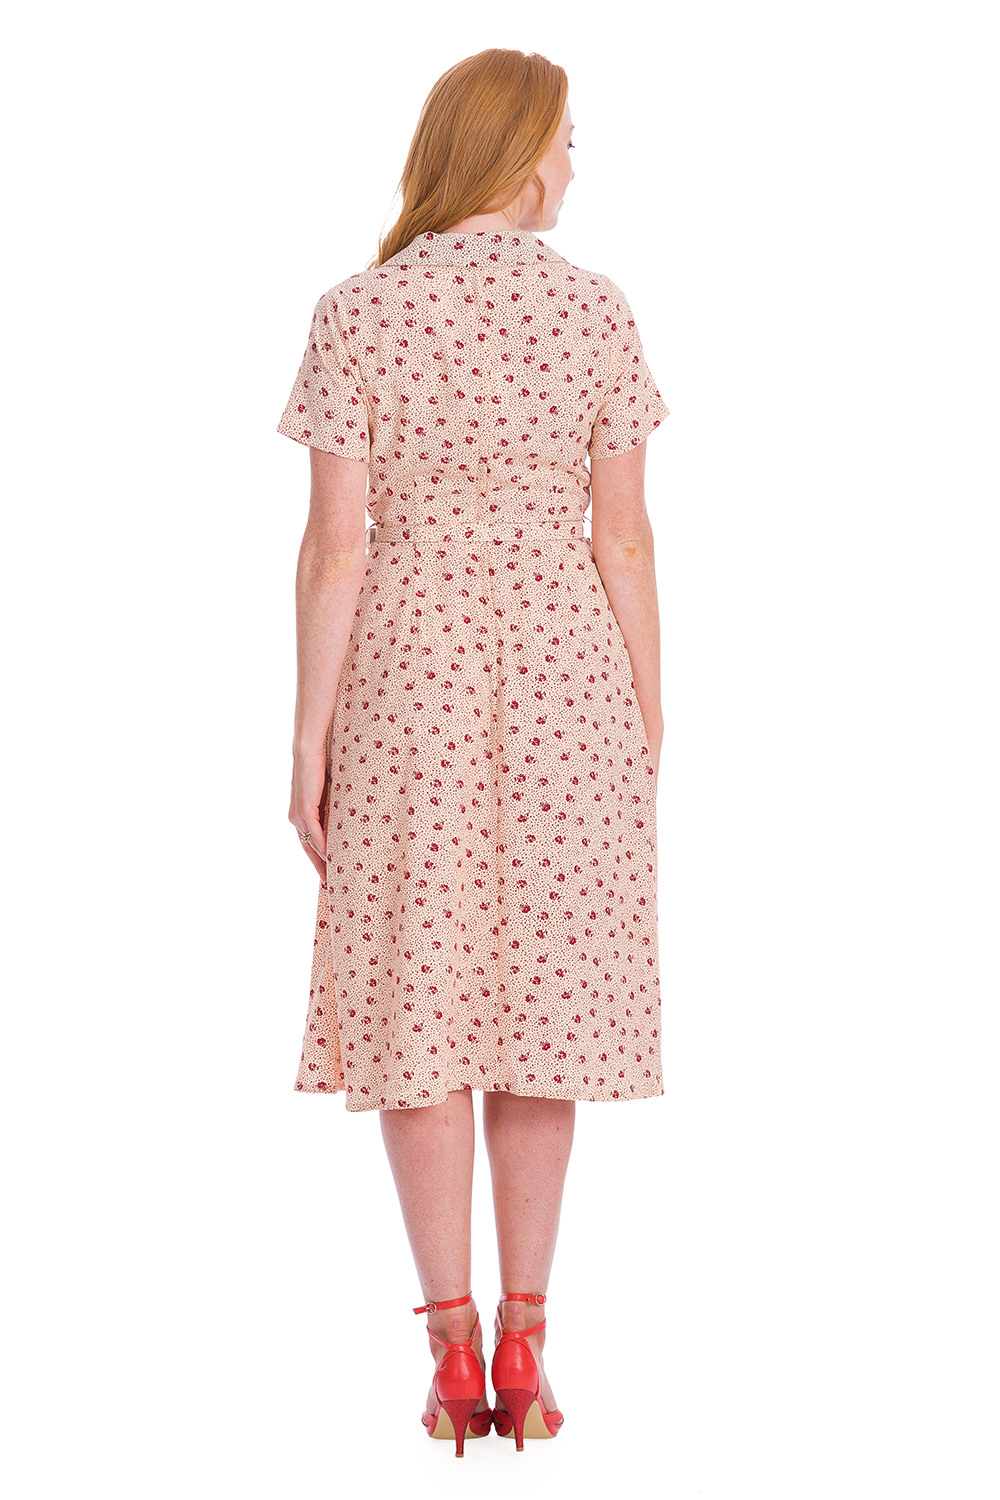 Banned Retro 40s Lady Pearl Swing Cream Floral Dress